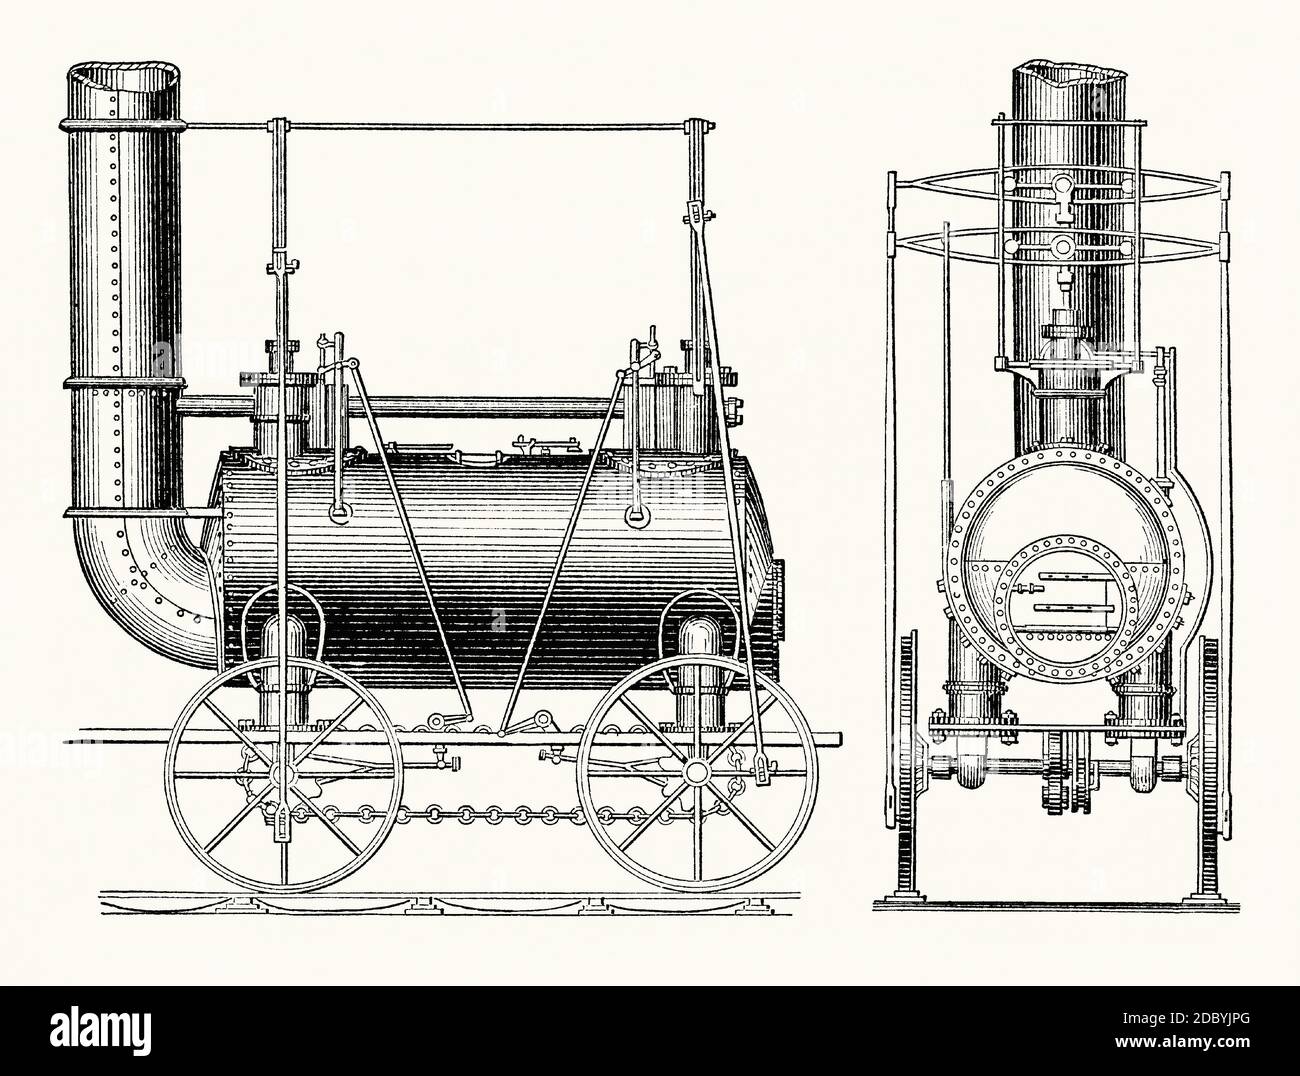 An old engraving George Stephenson’s locomotive of 1815. It is from a Victorian mechanical engineering book of the 1880s. George Stephenson (1781–1848) was an English civil engineer and mechanical engineer, renowned as the ‘Father of Railways’. Stephenson designed his first locomotive in 1814, designed for hauling coal at the Killingworth Colliery north of Newcastle Upon Tyne, North Tyneside, England, UK. It was named ‘Blücher’. In 1815 Stephenson improved the design with a direct link between cylinder and wheels using a ball and socket joint. The drive wheels were connected by chains. Stock Photo